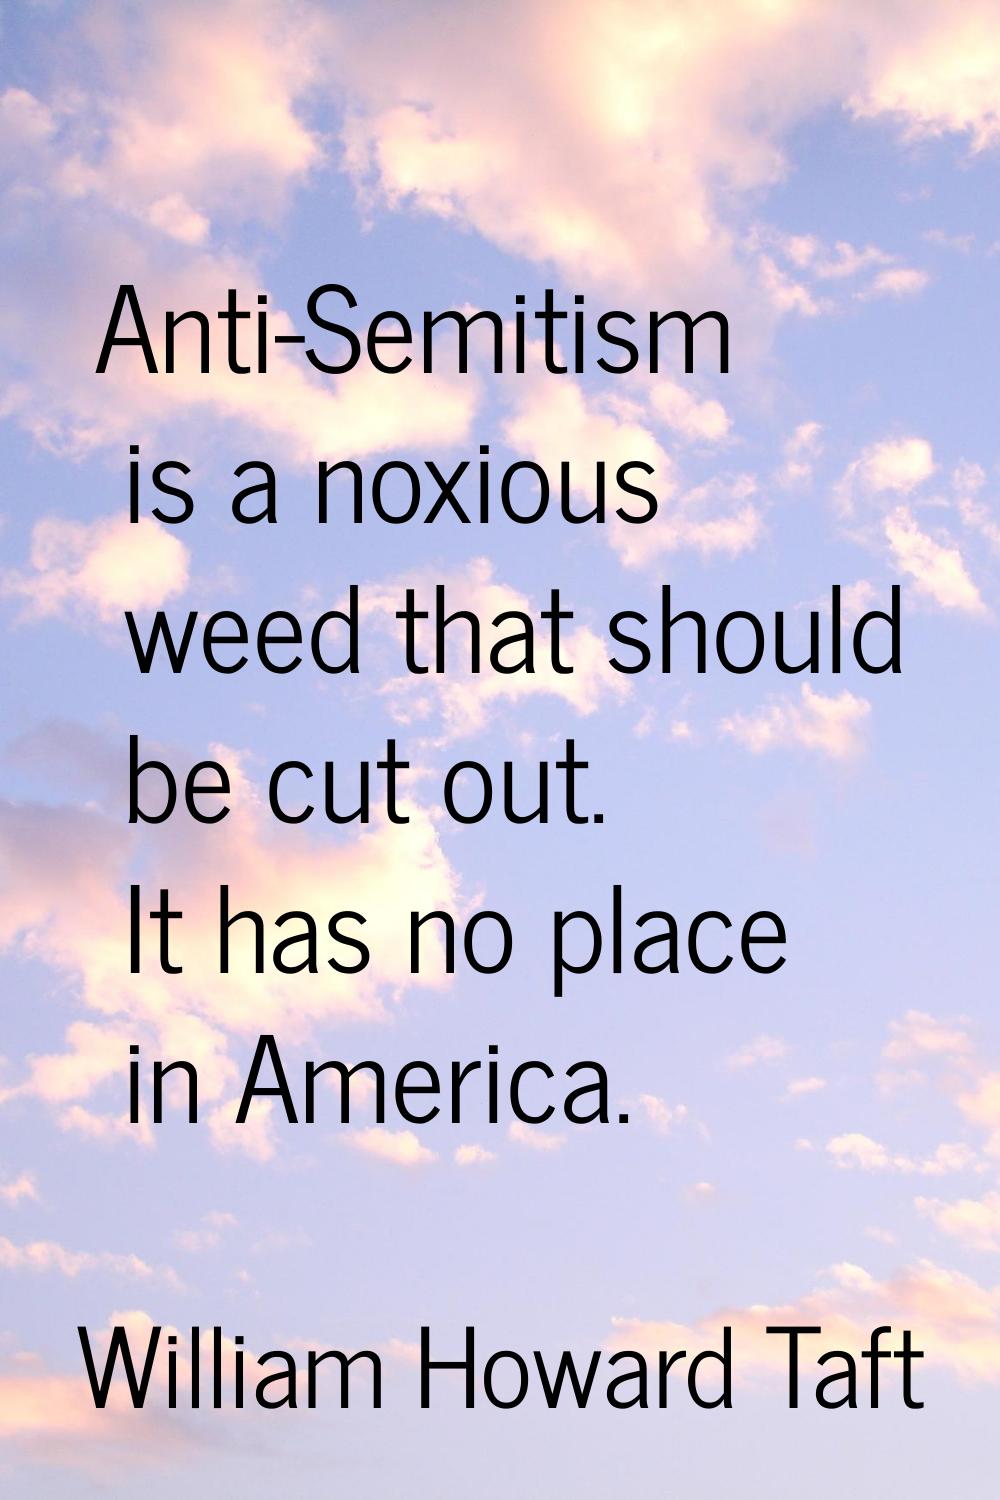 Anti-Semitism is a noxious weed that should be cut out. It has no place in America.